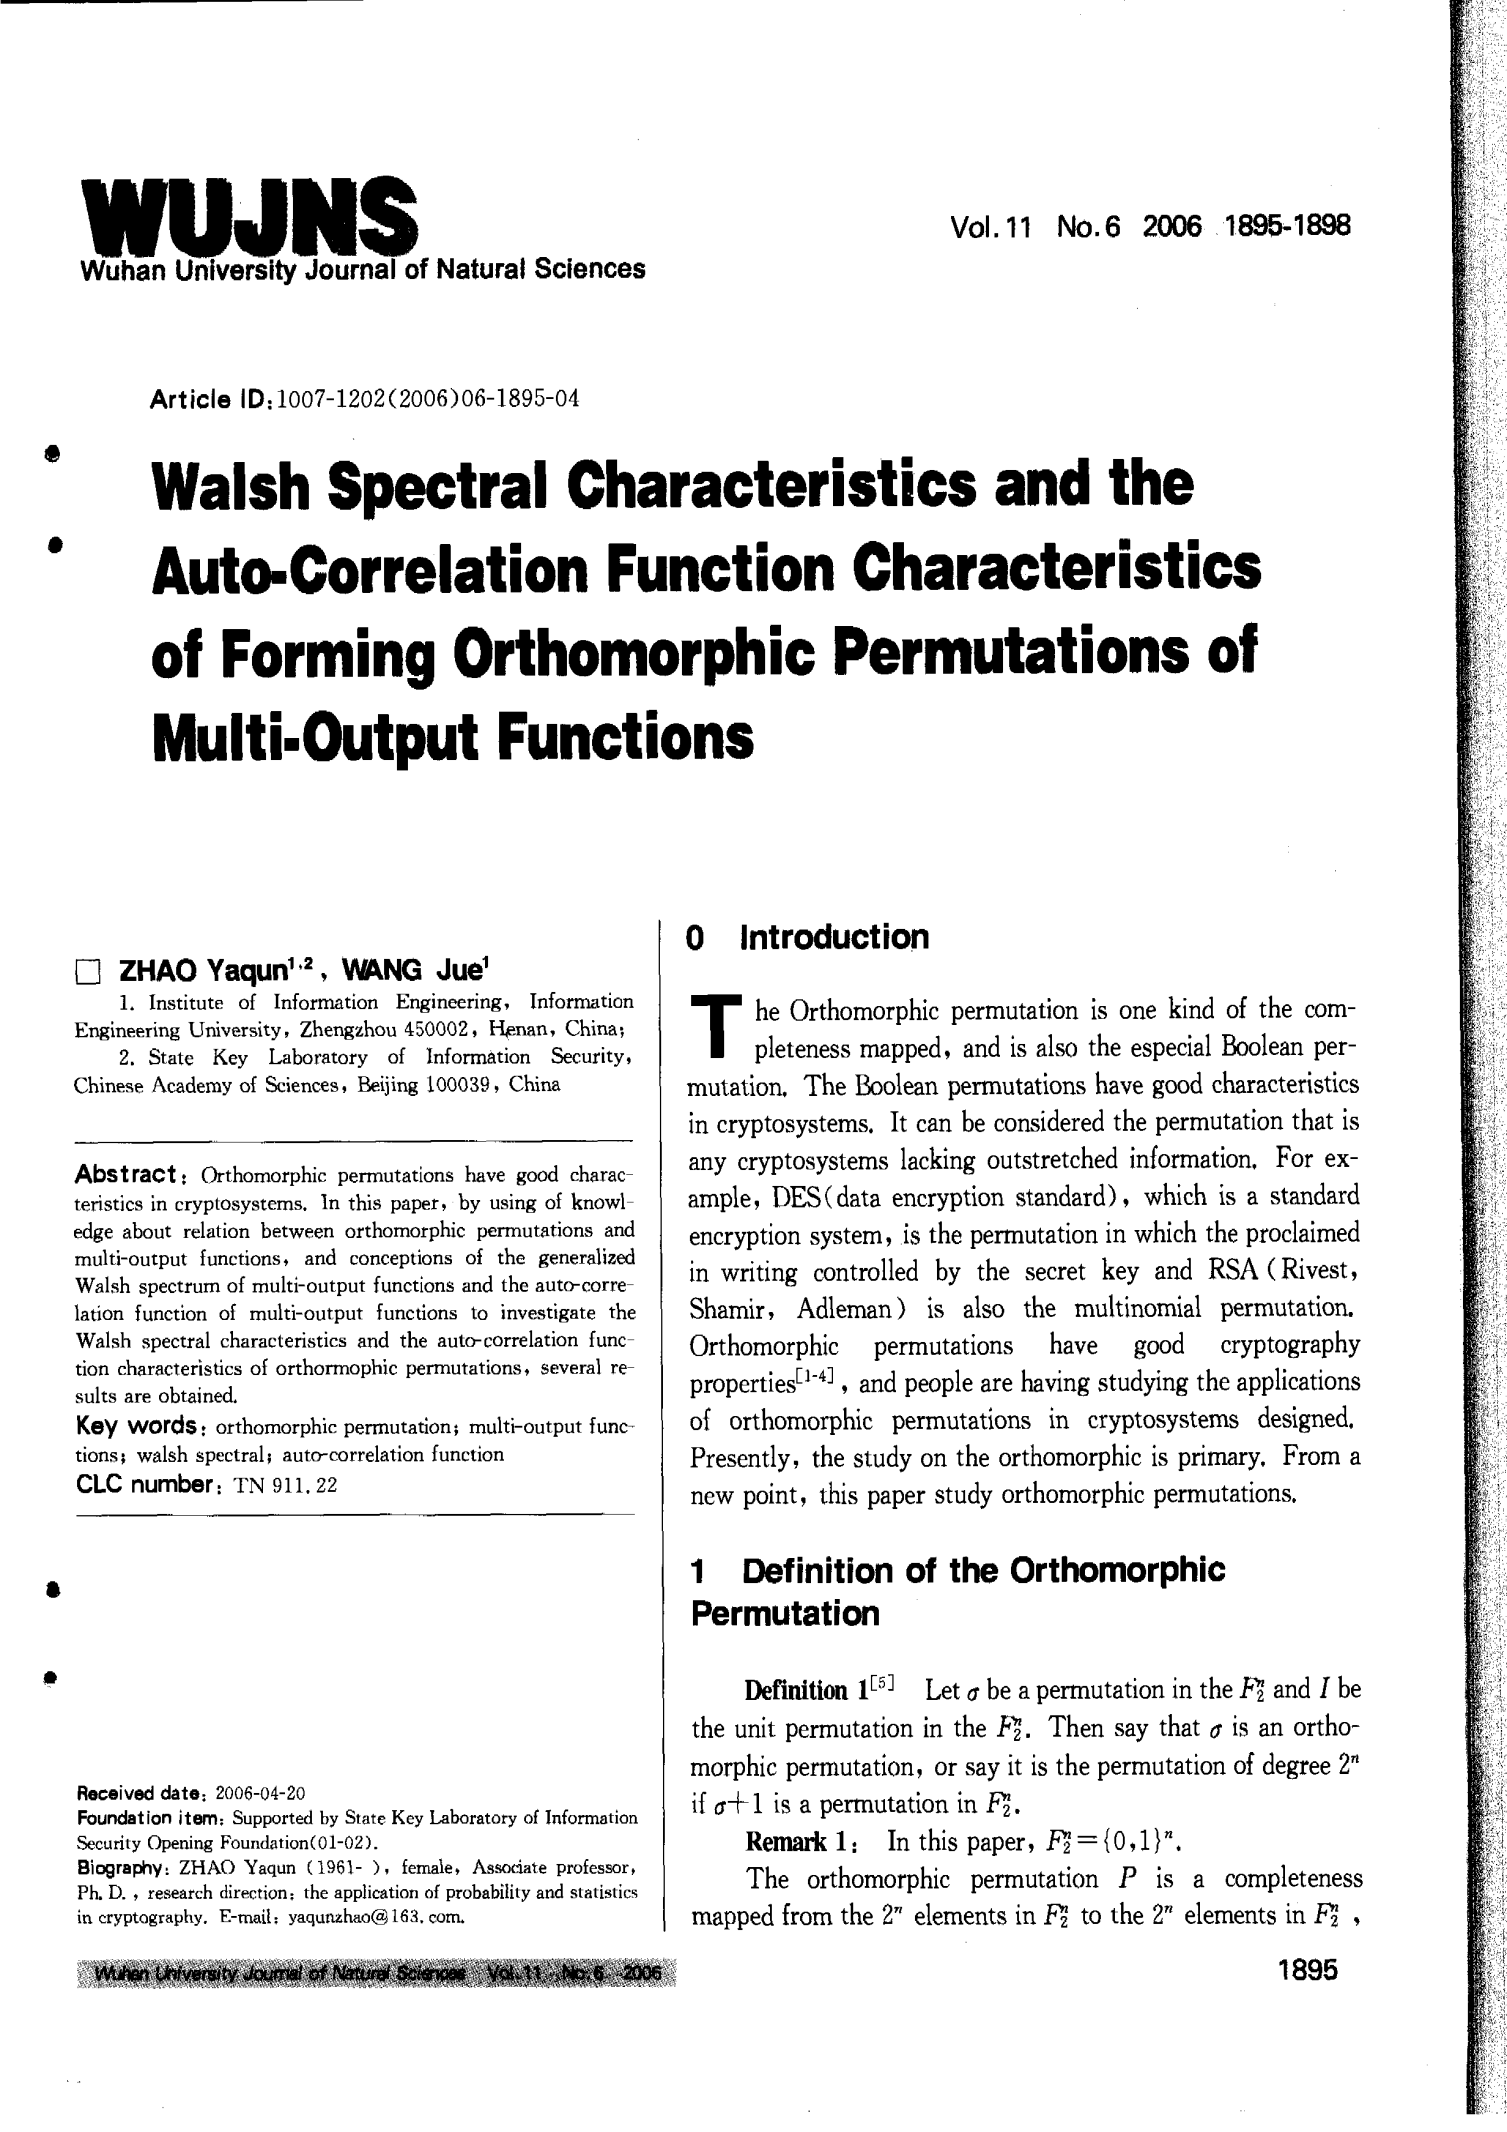 Walsh Spectral Characteristics and the Auto-Correlation Function Characteristics of Forming Orth